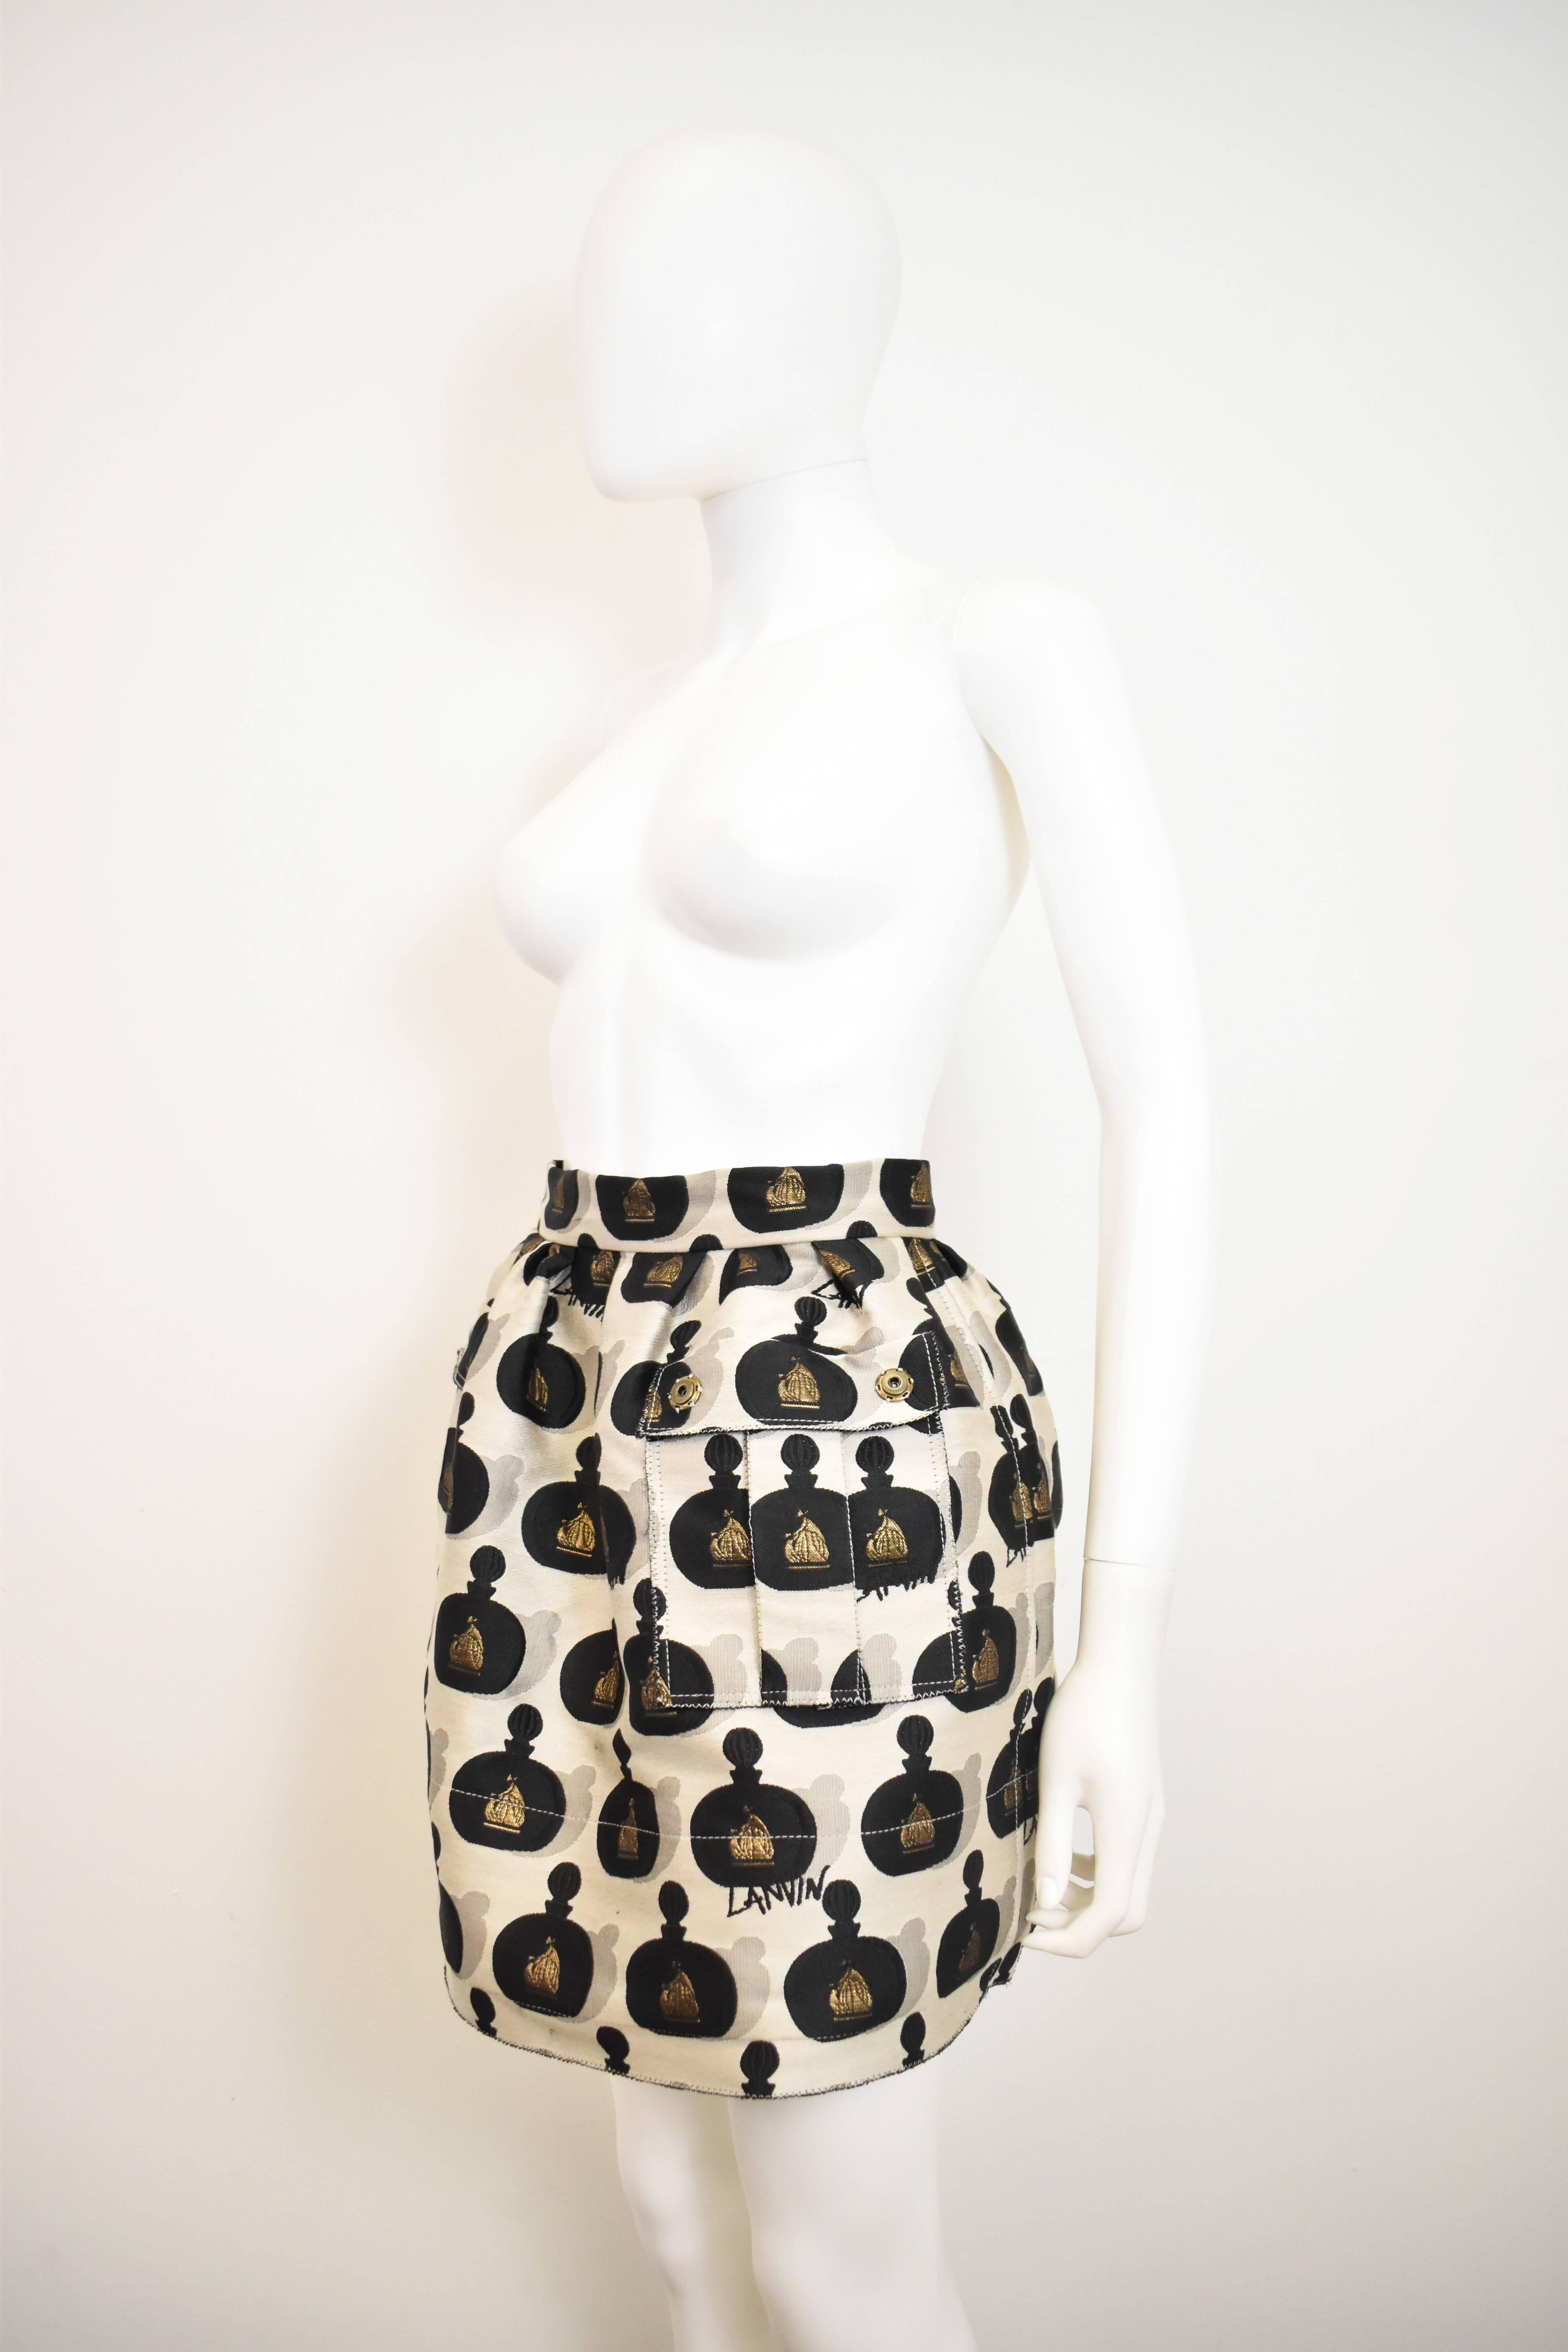 A brand new and unworn Spring/Summer 2016 Lanvin puff-ball skirt. It is made from a champagne and black coloured brocade fabric with perfume bottle design and gold thread Lanvin logo. There is also a repeated ‘Lanvin’ graffiti style text throughout